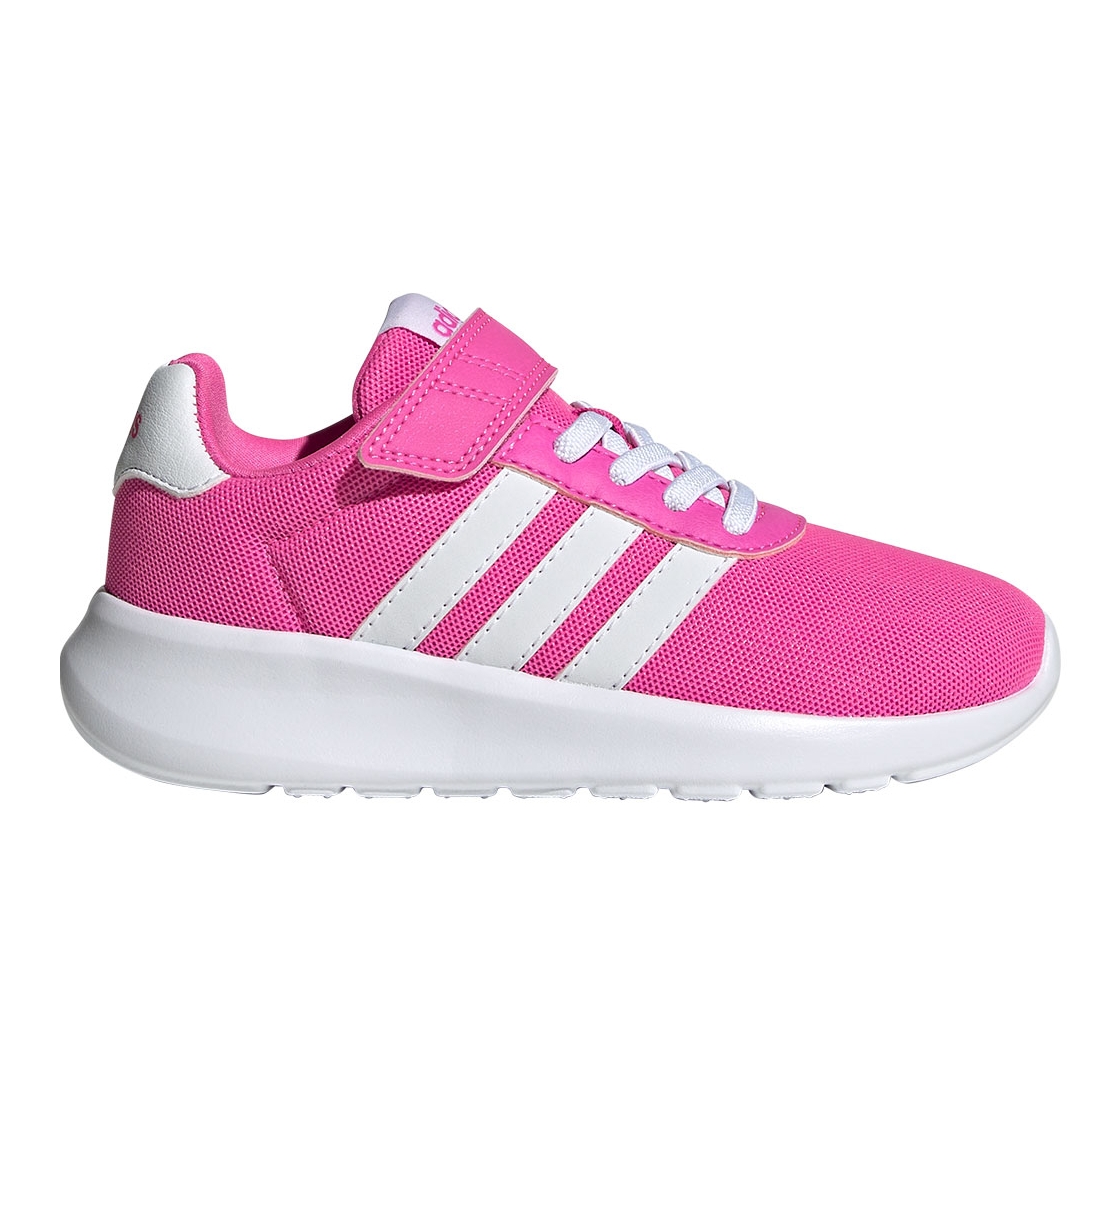 adidas Παιδικό Παπούτσι Ss22 Lite Racer 3.0 Shoes GW9119